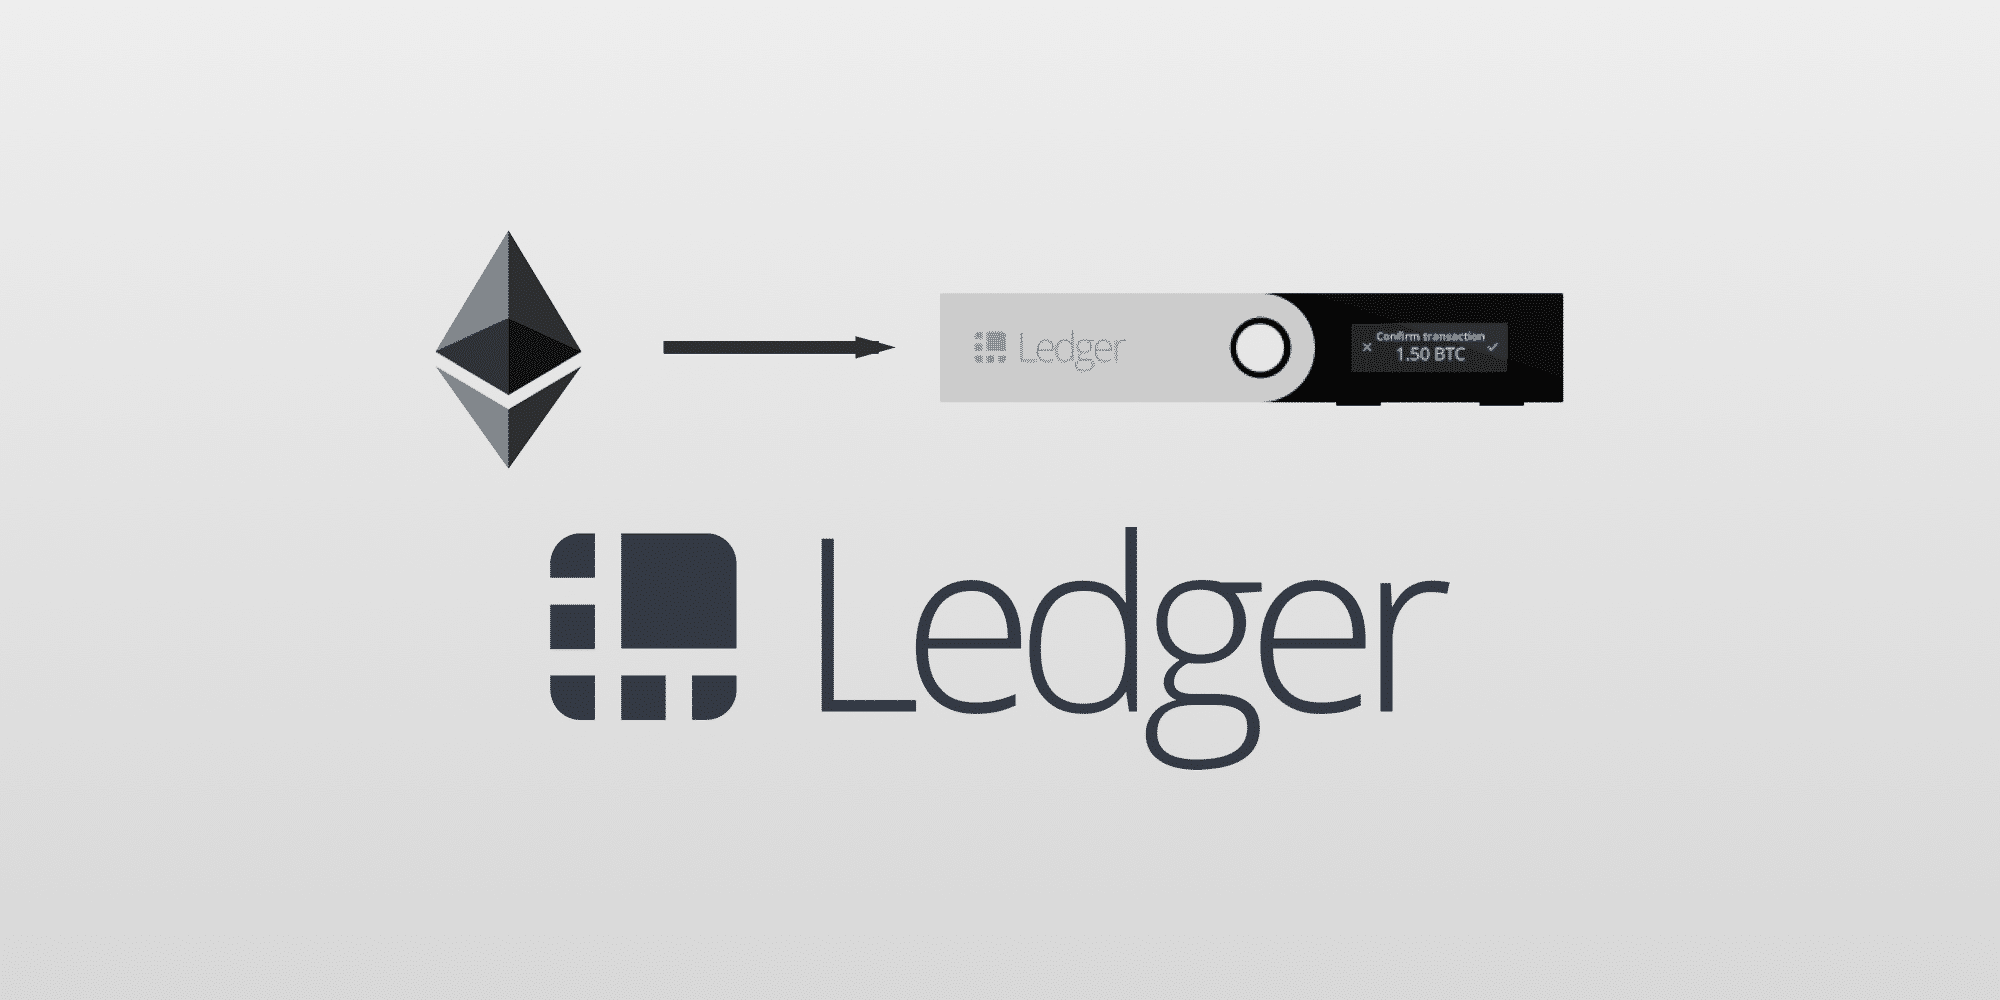 how to send ethereum to my ledger nano s